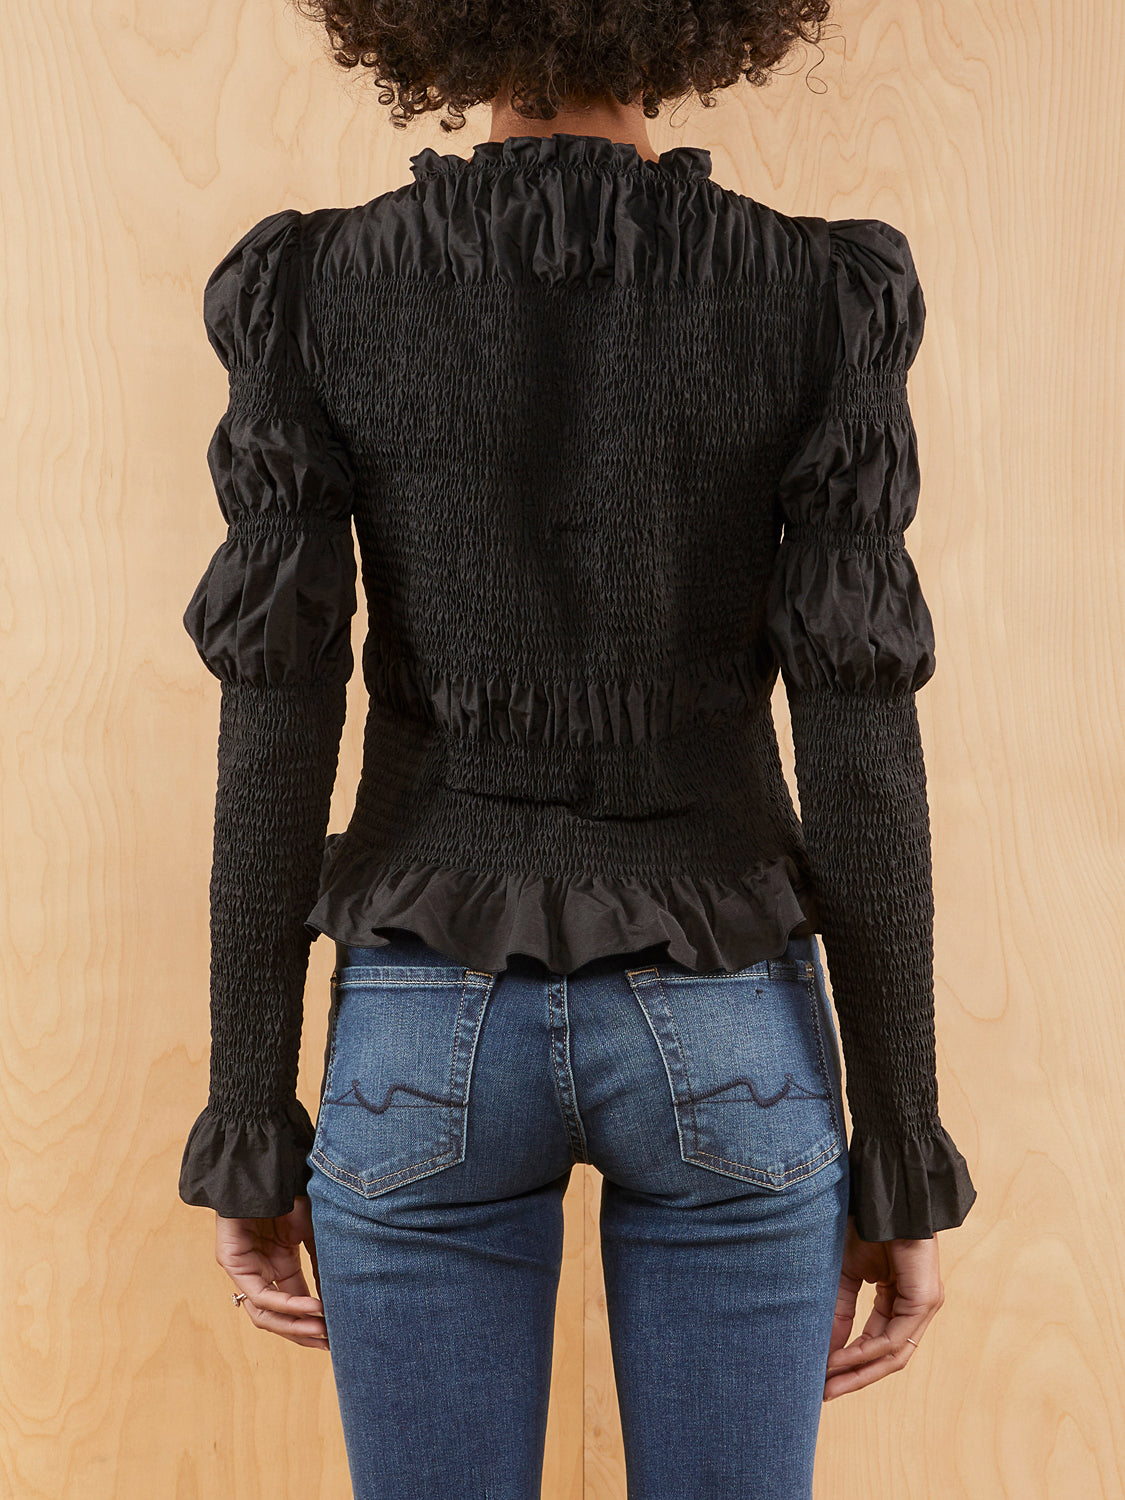 & Other Stories Black Rouched Blouse